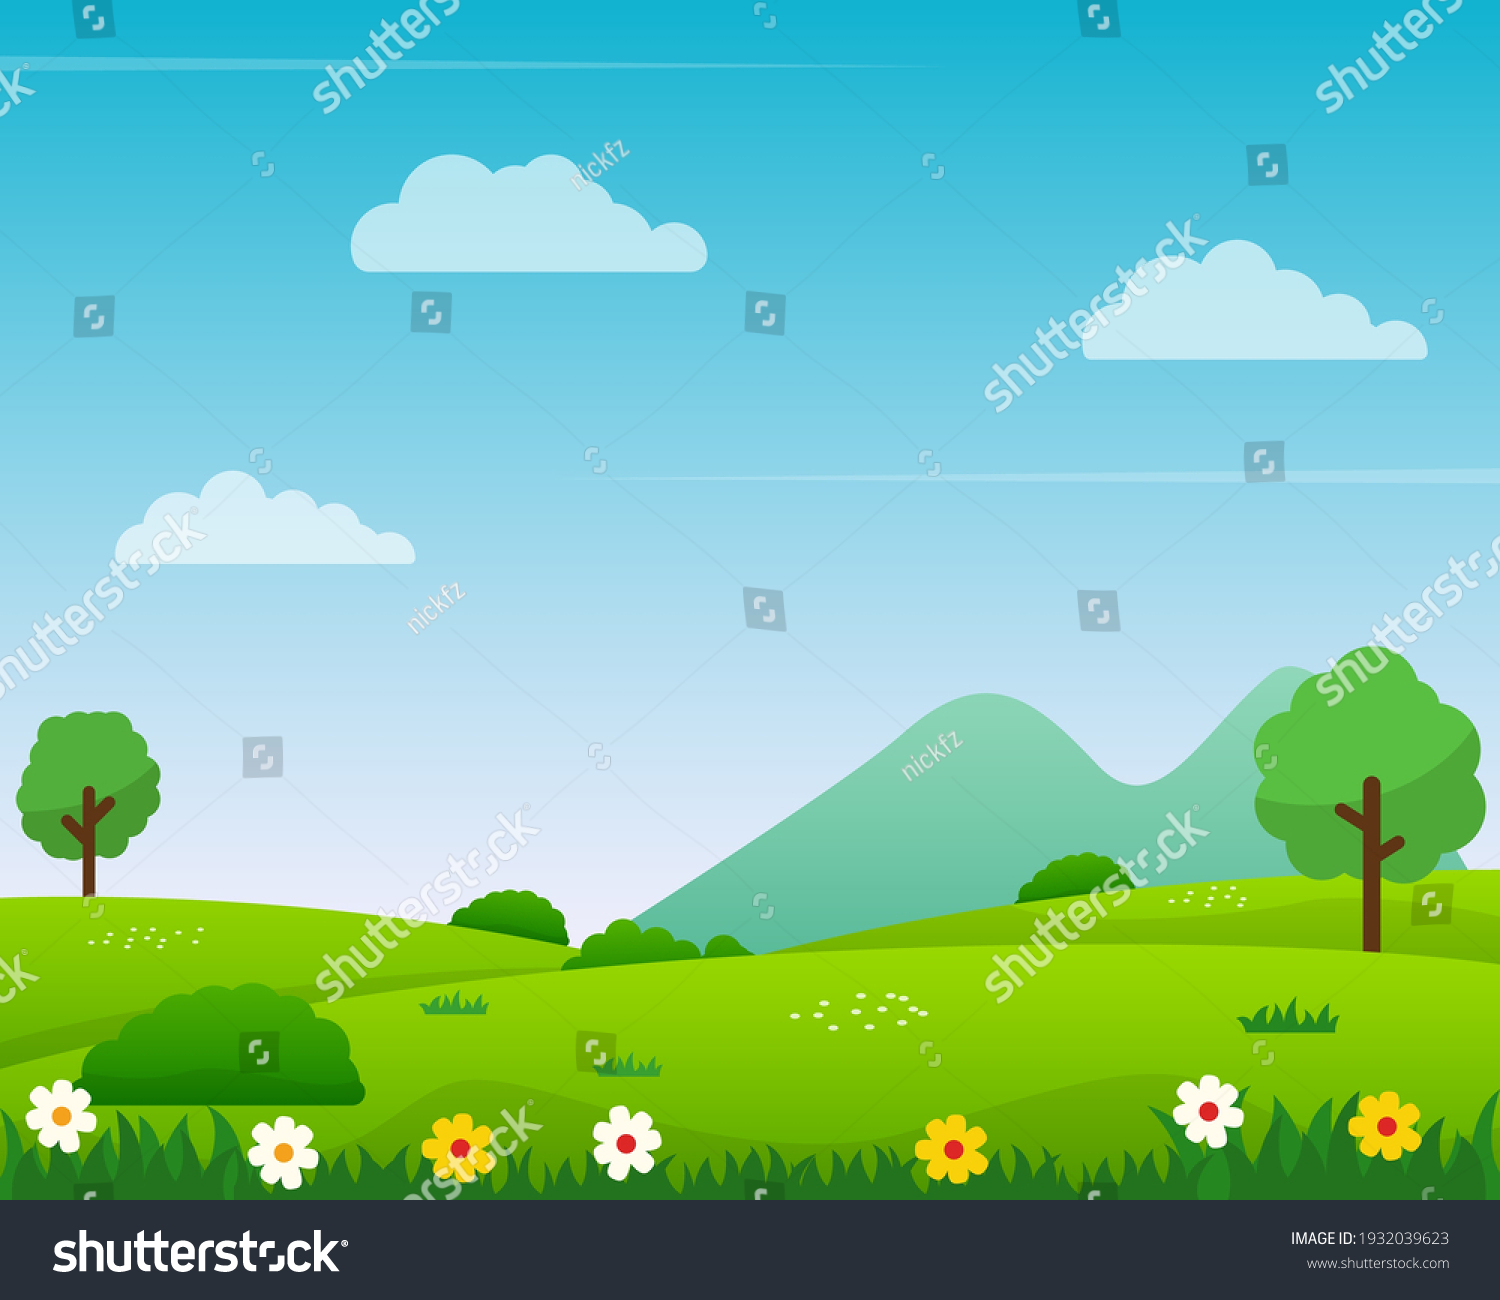 Nature landscape vector illustration with cartoon style. Beautiful spring landscape cartoon with green grass and blue sky #1932039623